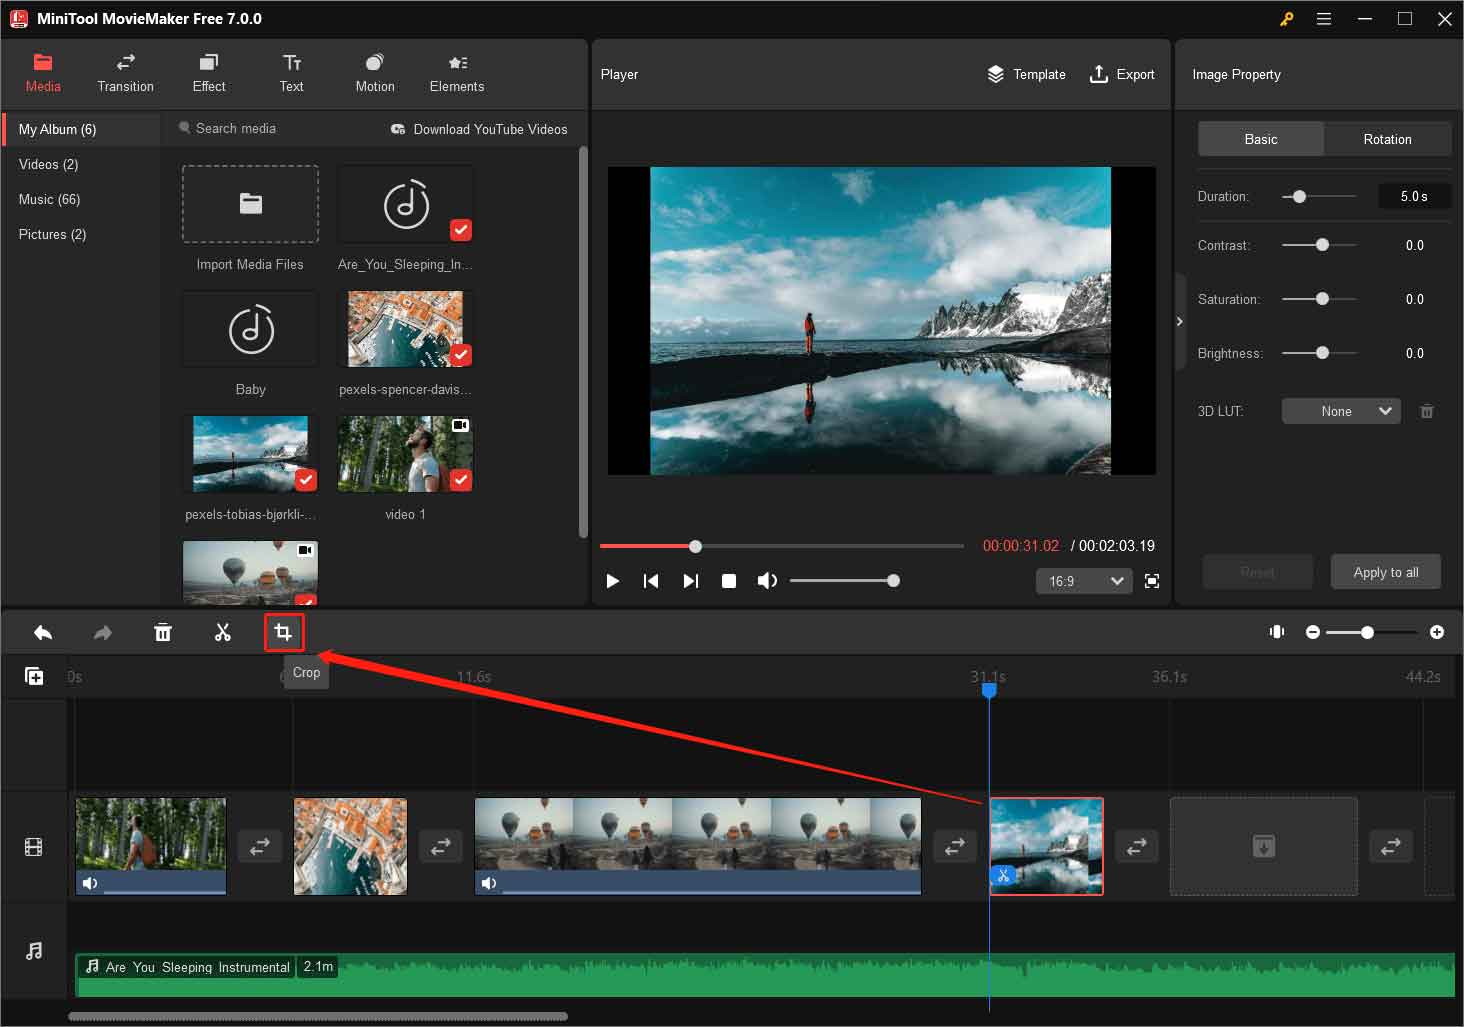 click on the Crop icon in MiniTool MovieMaker